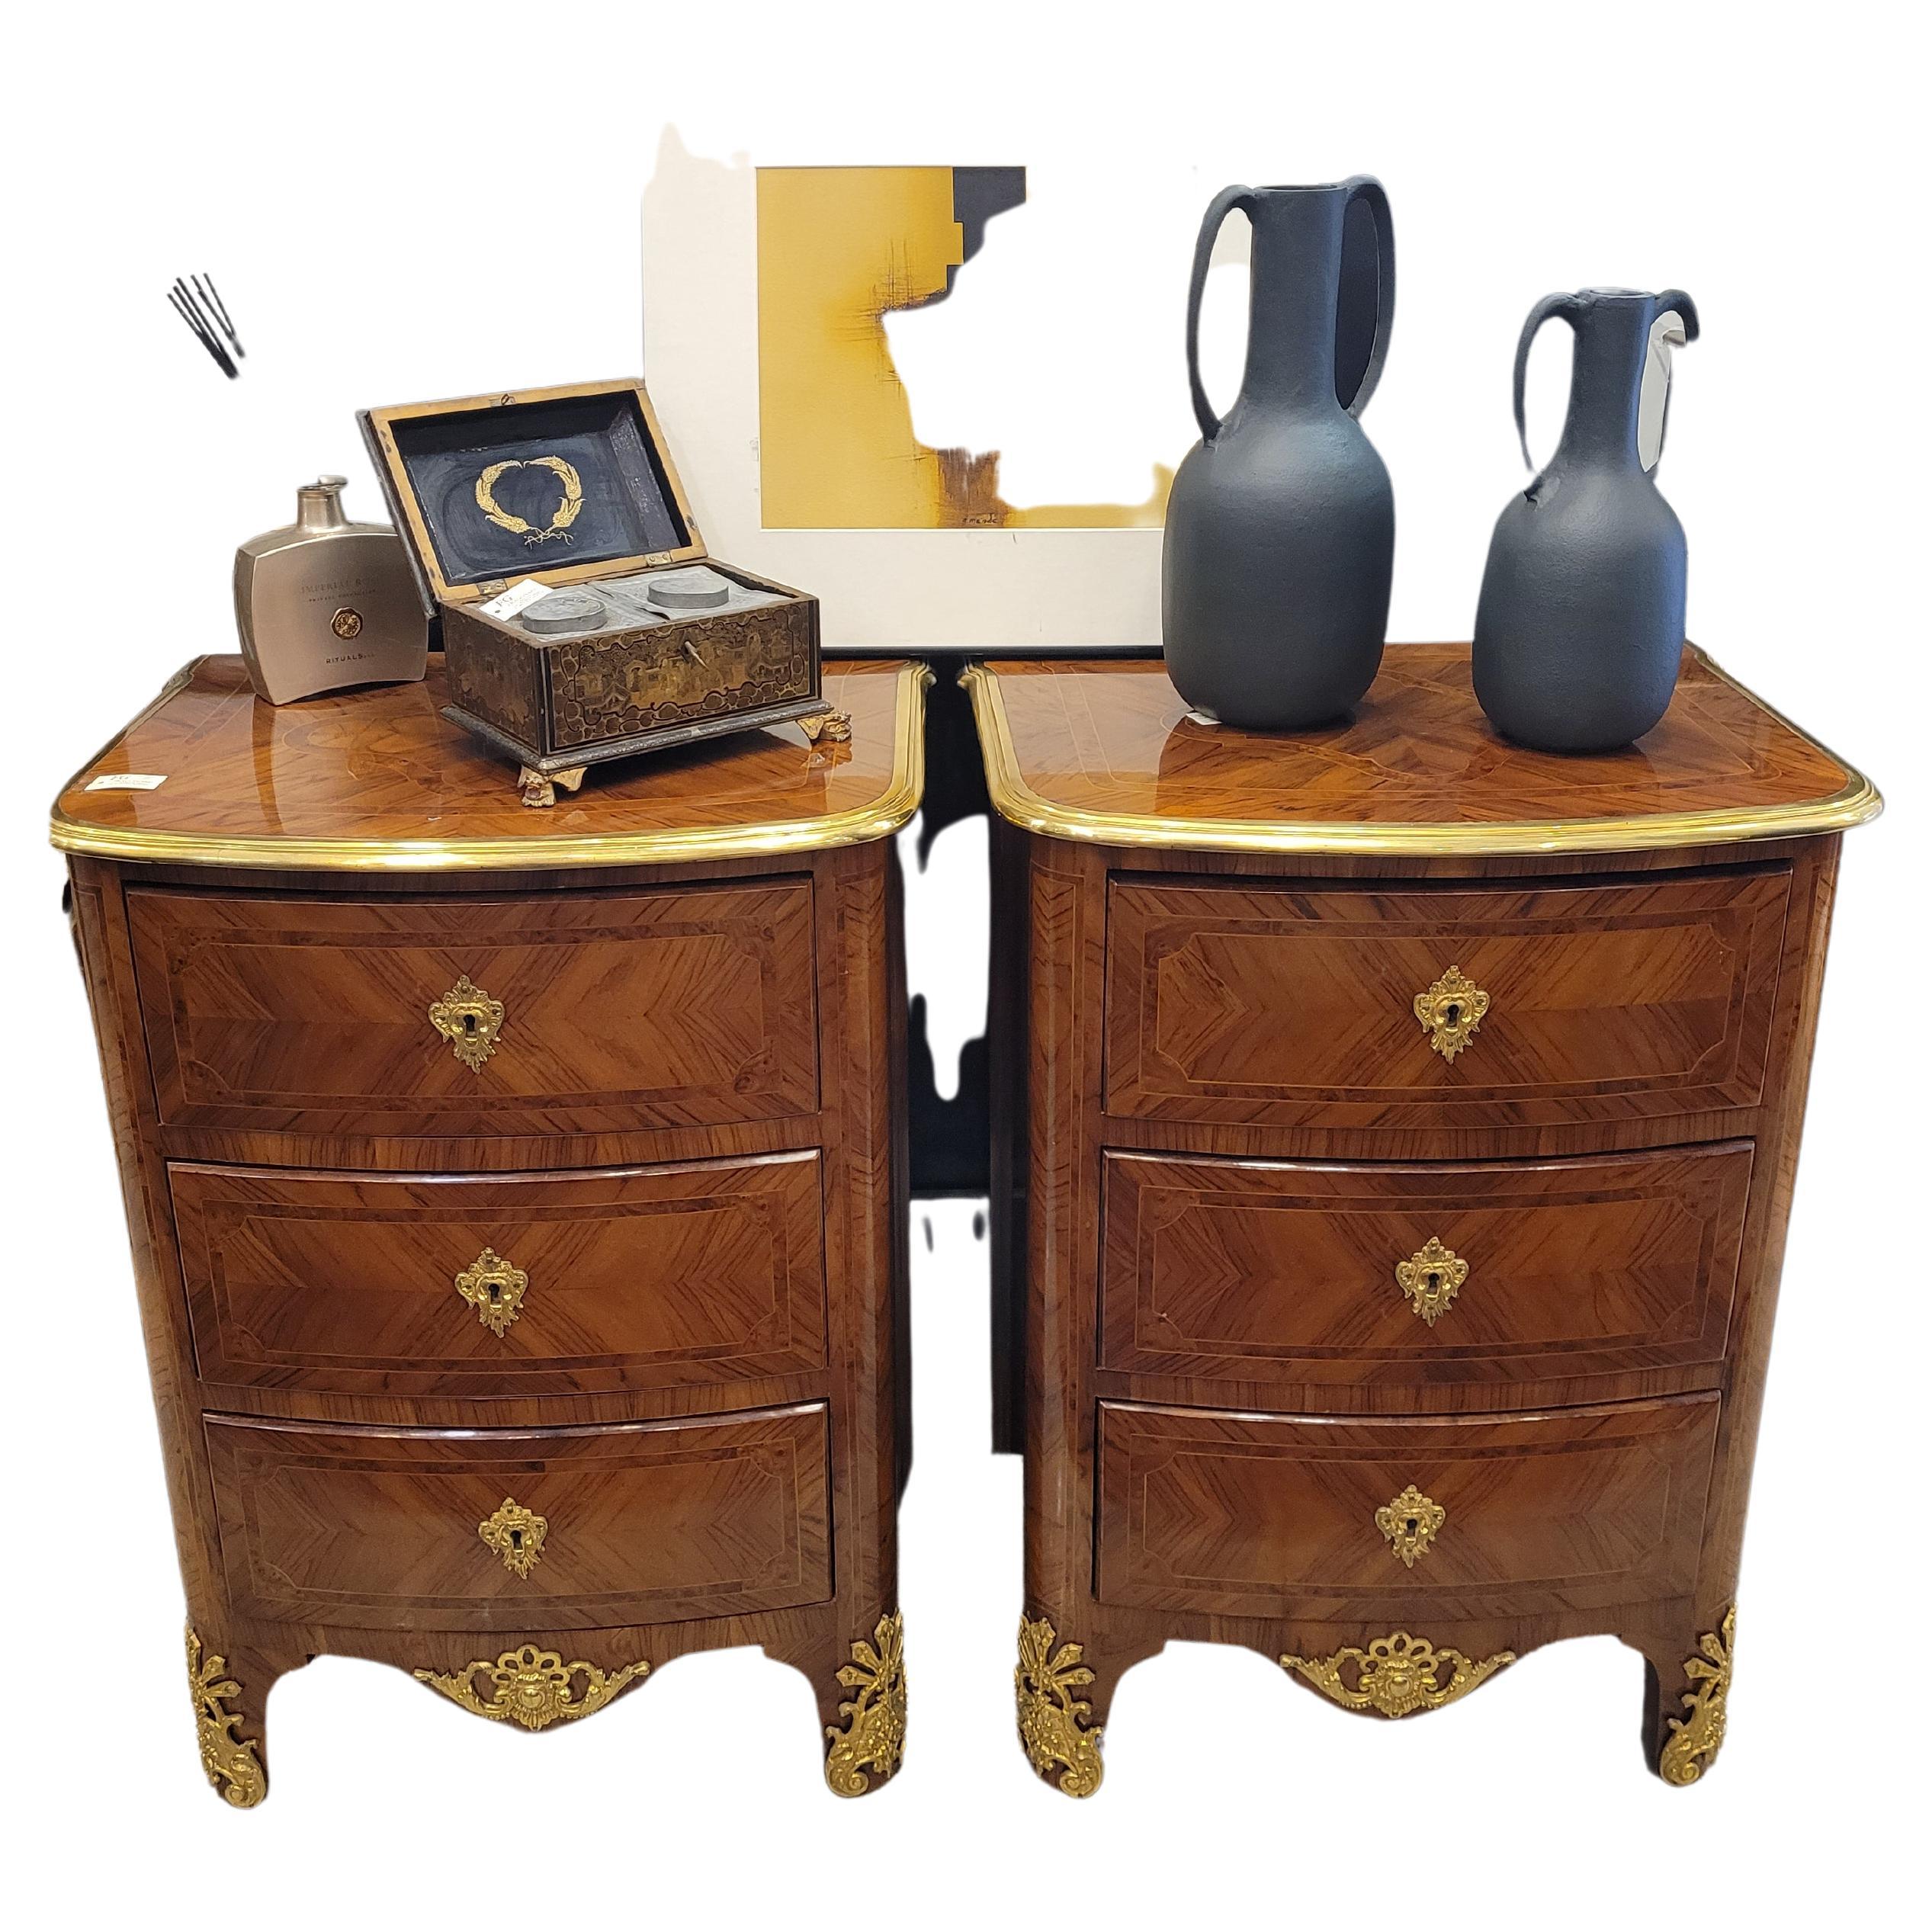 On of a kind pair of small Louis XVI commodes or chest of drawers from France, circa 1800, in marquetry of different woods and ormolu keyholes and keys .
on profiled with gilded bronze to mercury embedded, marking the gently wavy profile.
Legs and